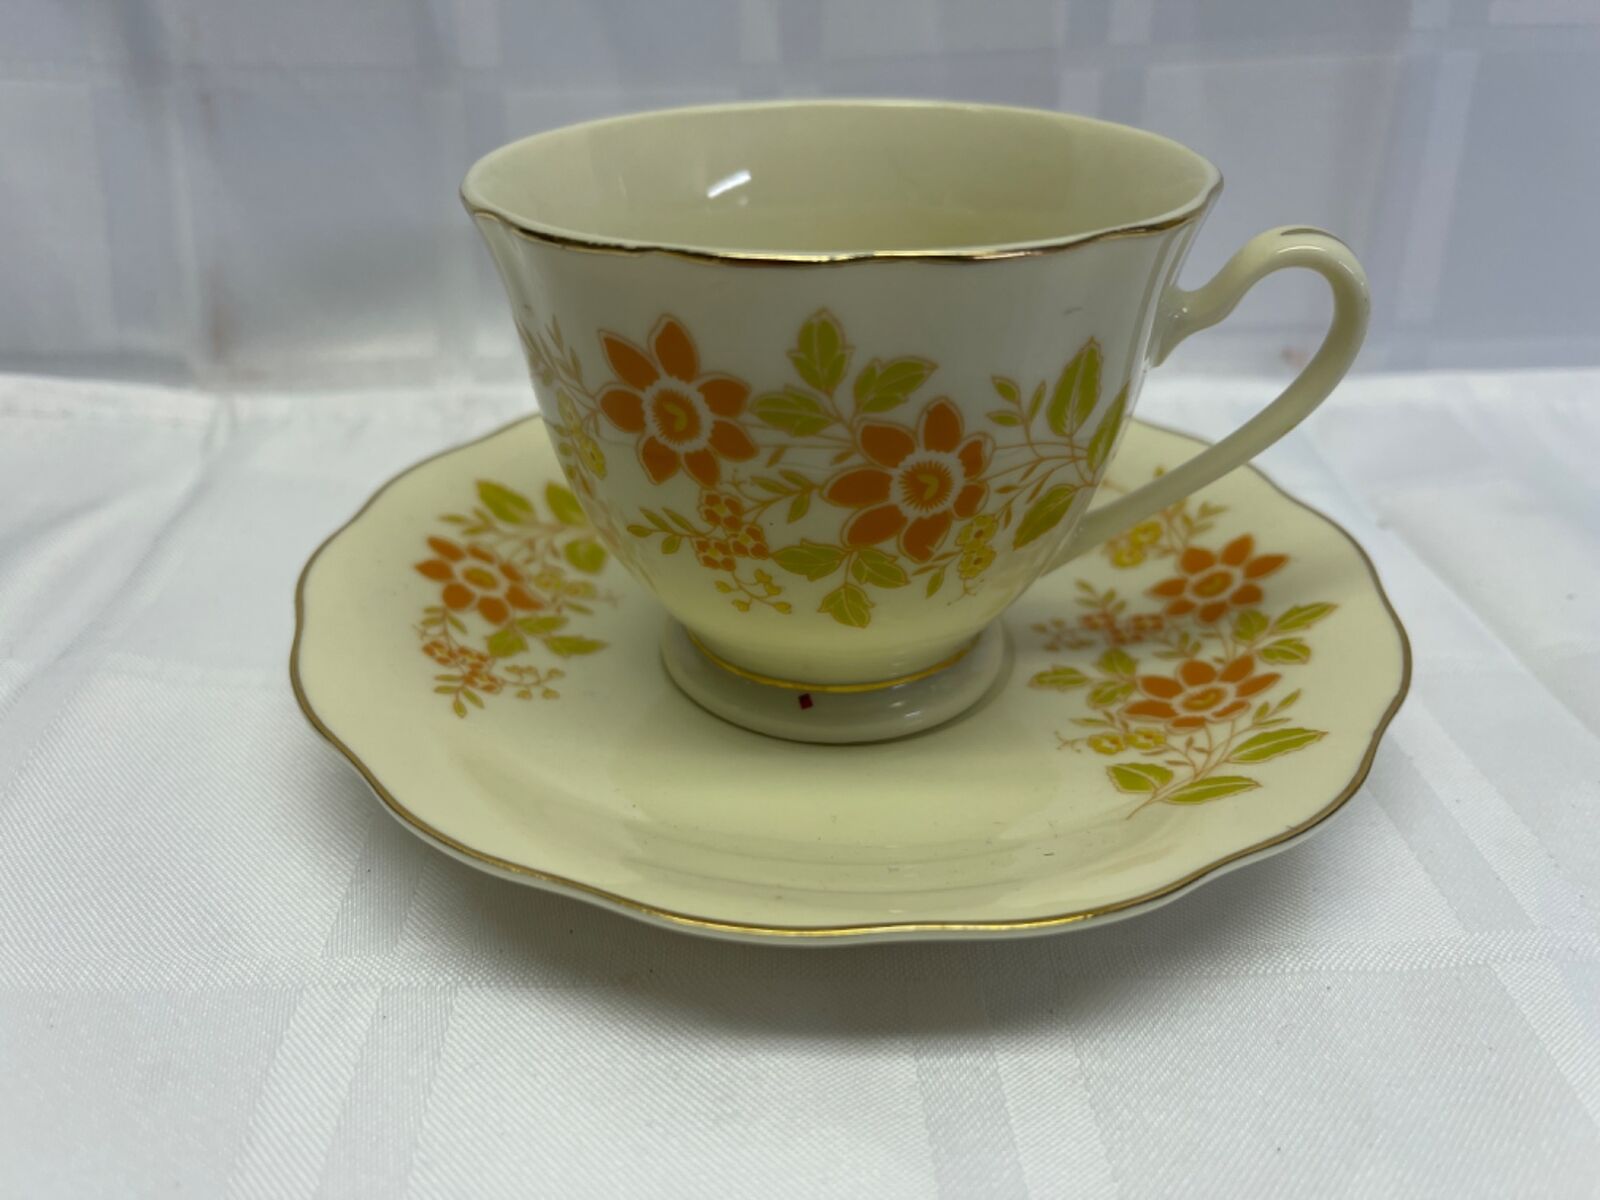 Budlet Teacup Saucer Set Vintage Bone China Pale yellow with Orange and Green fl